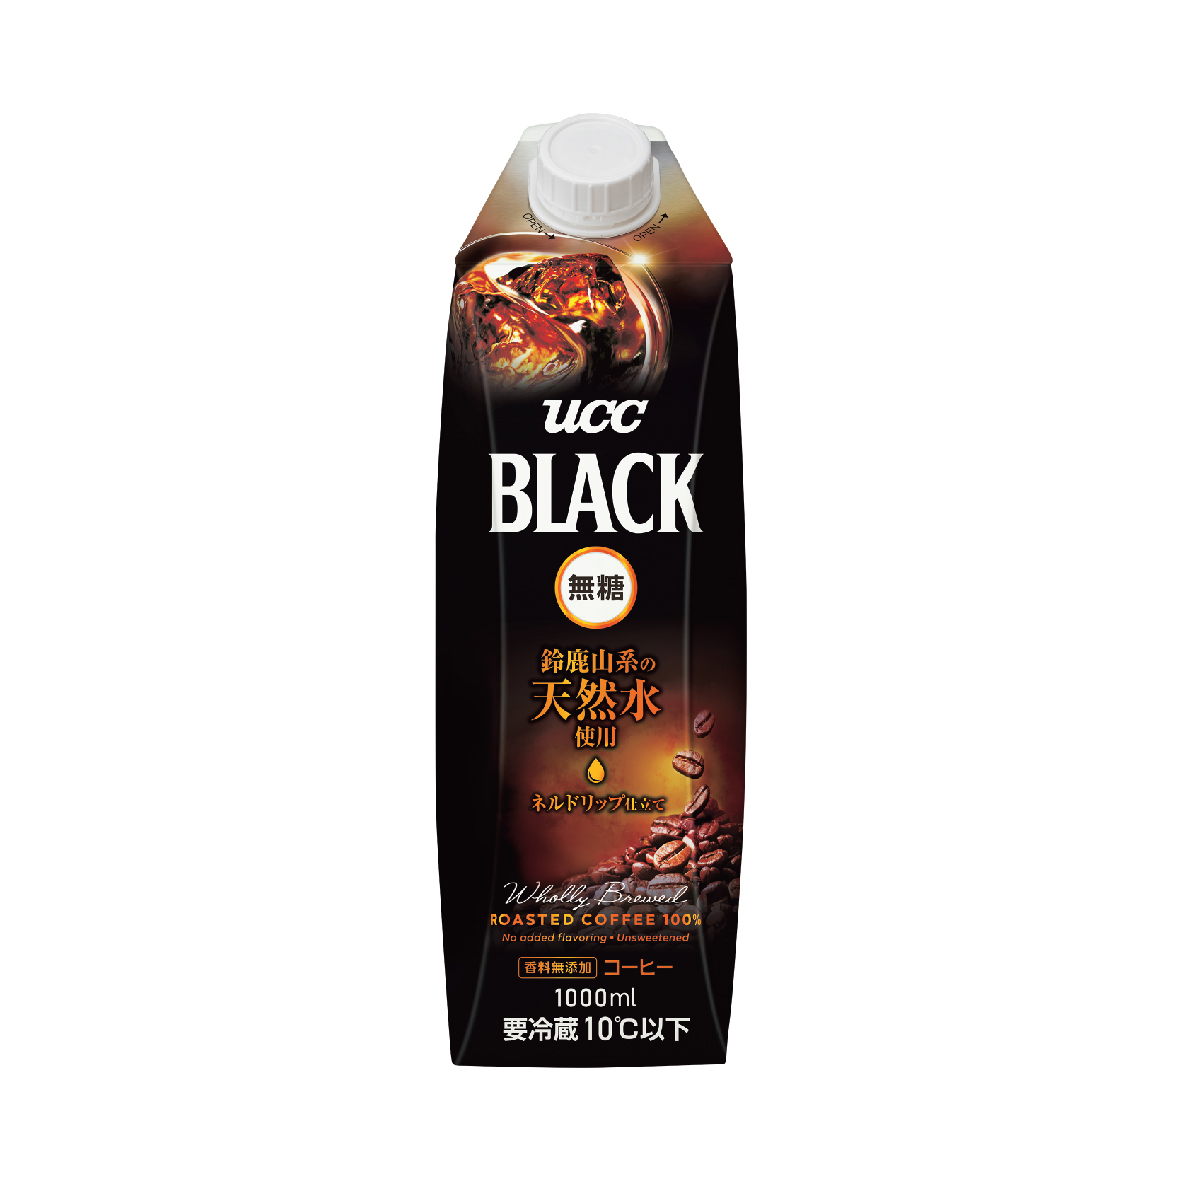 UCC Black Unsweetened Coffee Pack